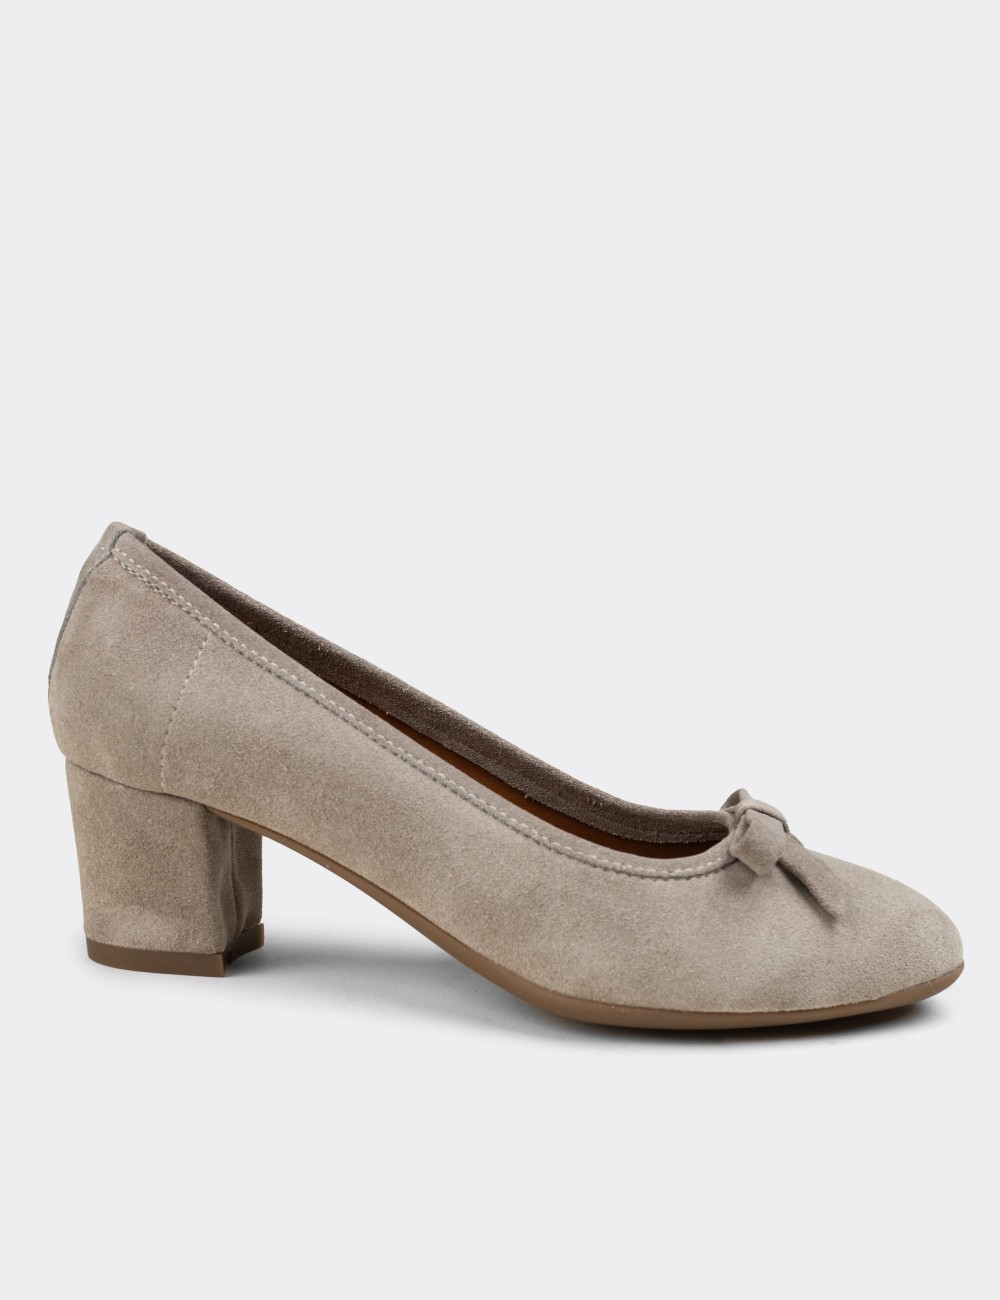 Gray Suede Leather Heel - E1471ZGRIC01